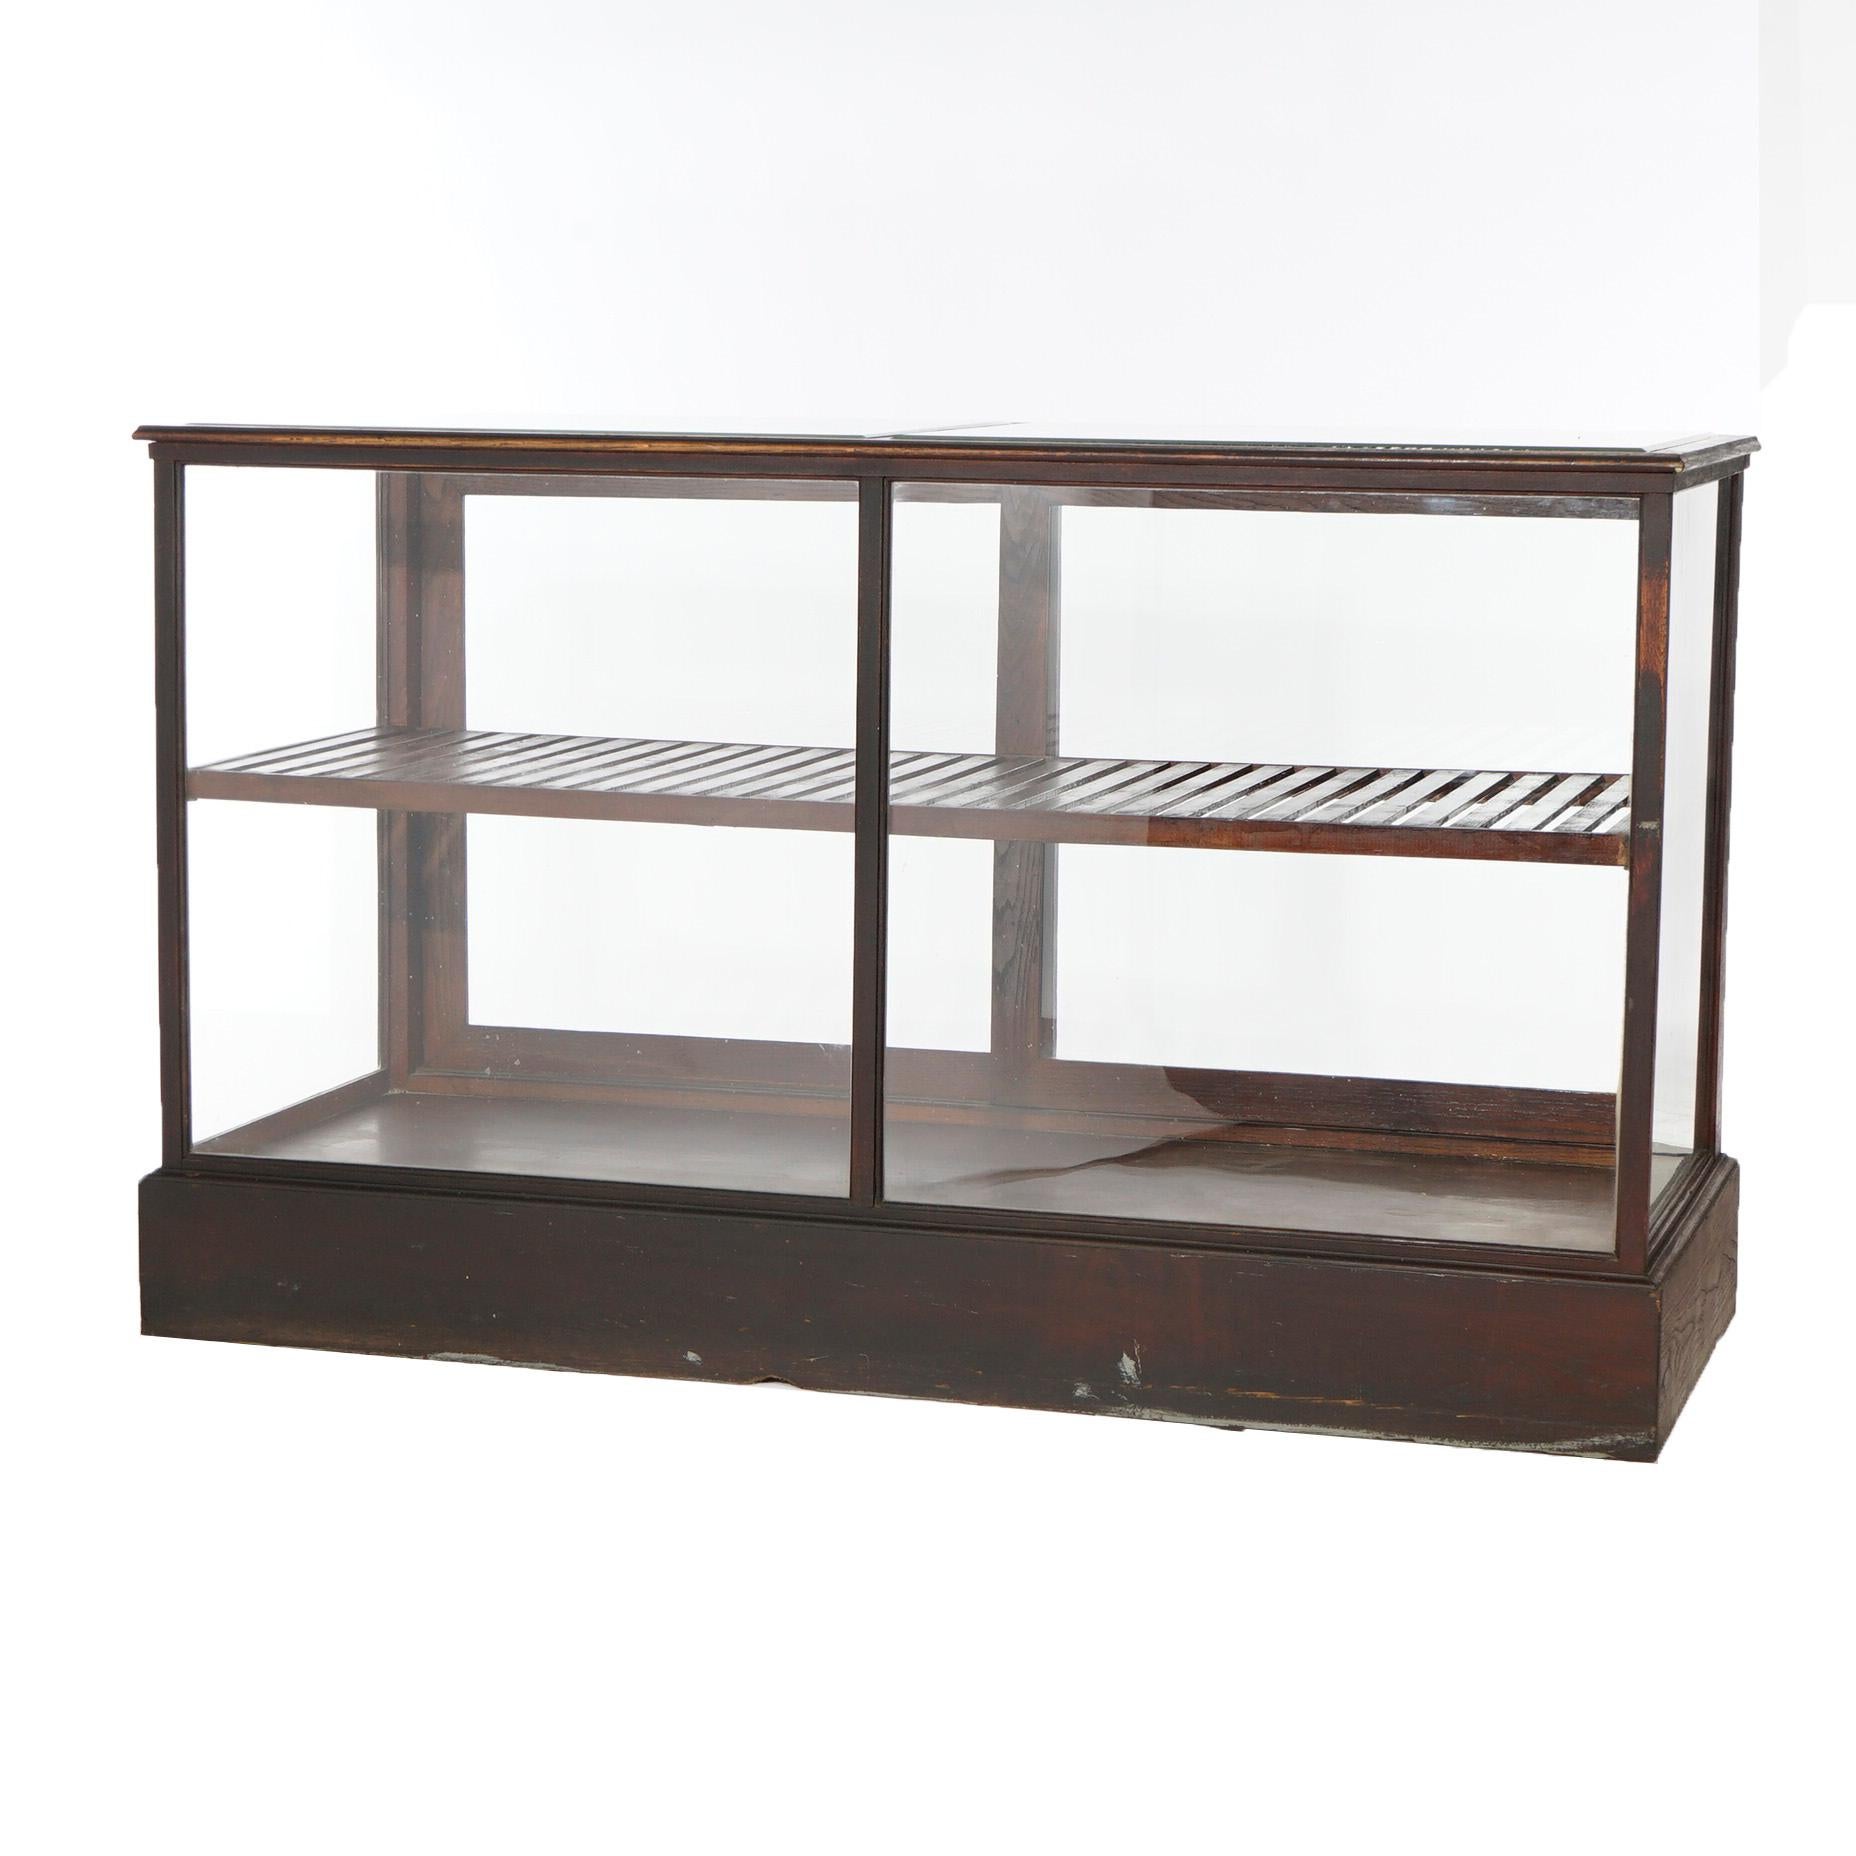 An antique country store display case offers oak construction with case at counter height and sliding glass doors opening to slat shelf interior, c1900

Measures- 43.25'' H x 72'' W x 29'' D.